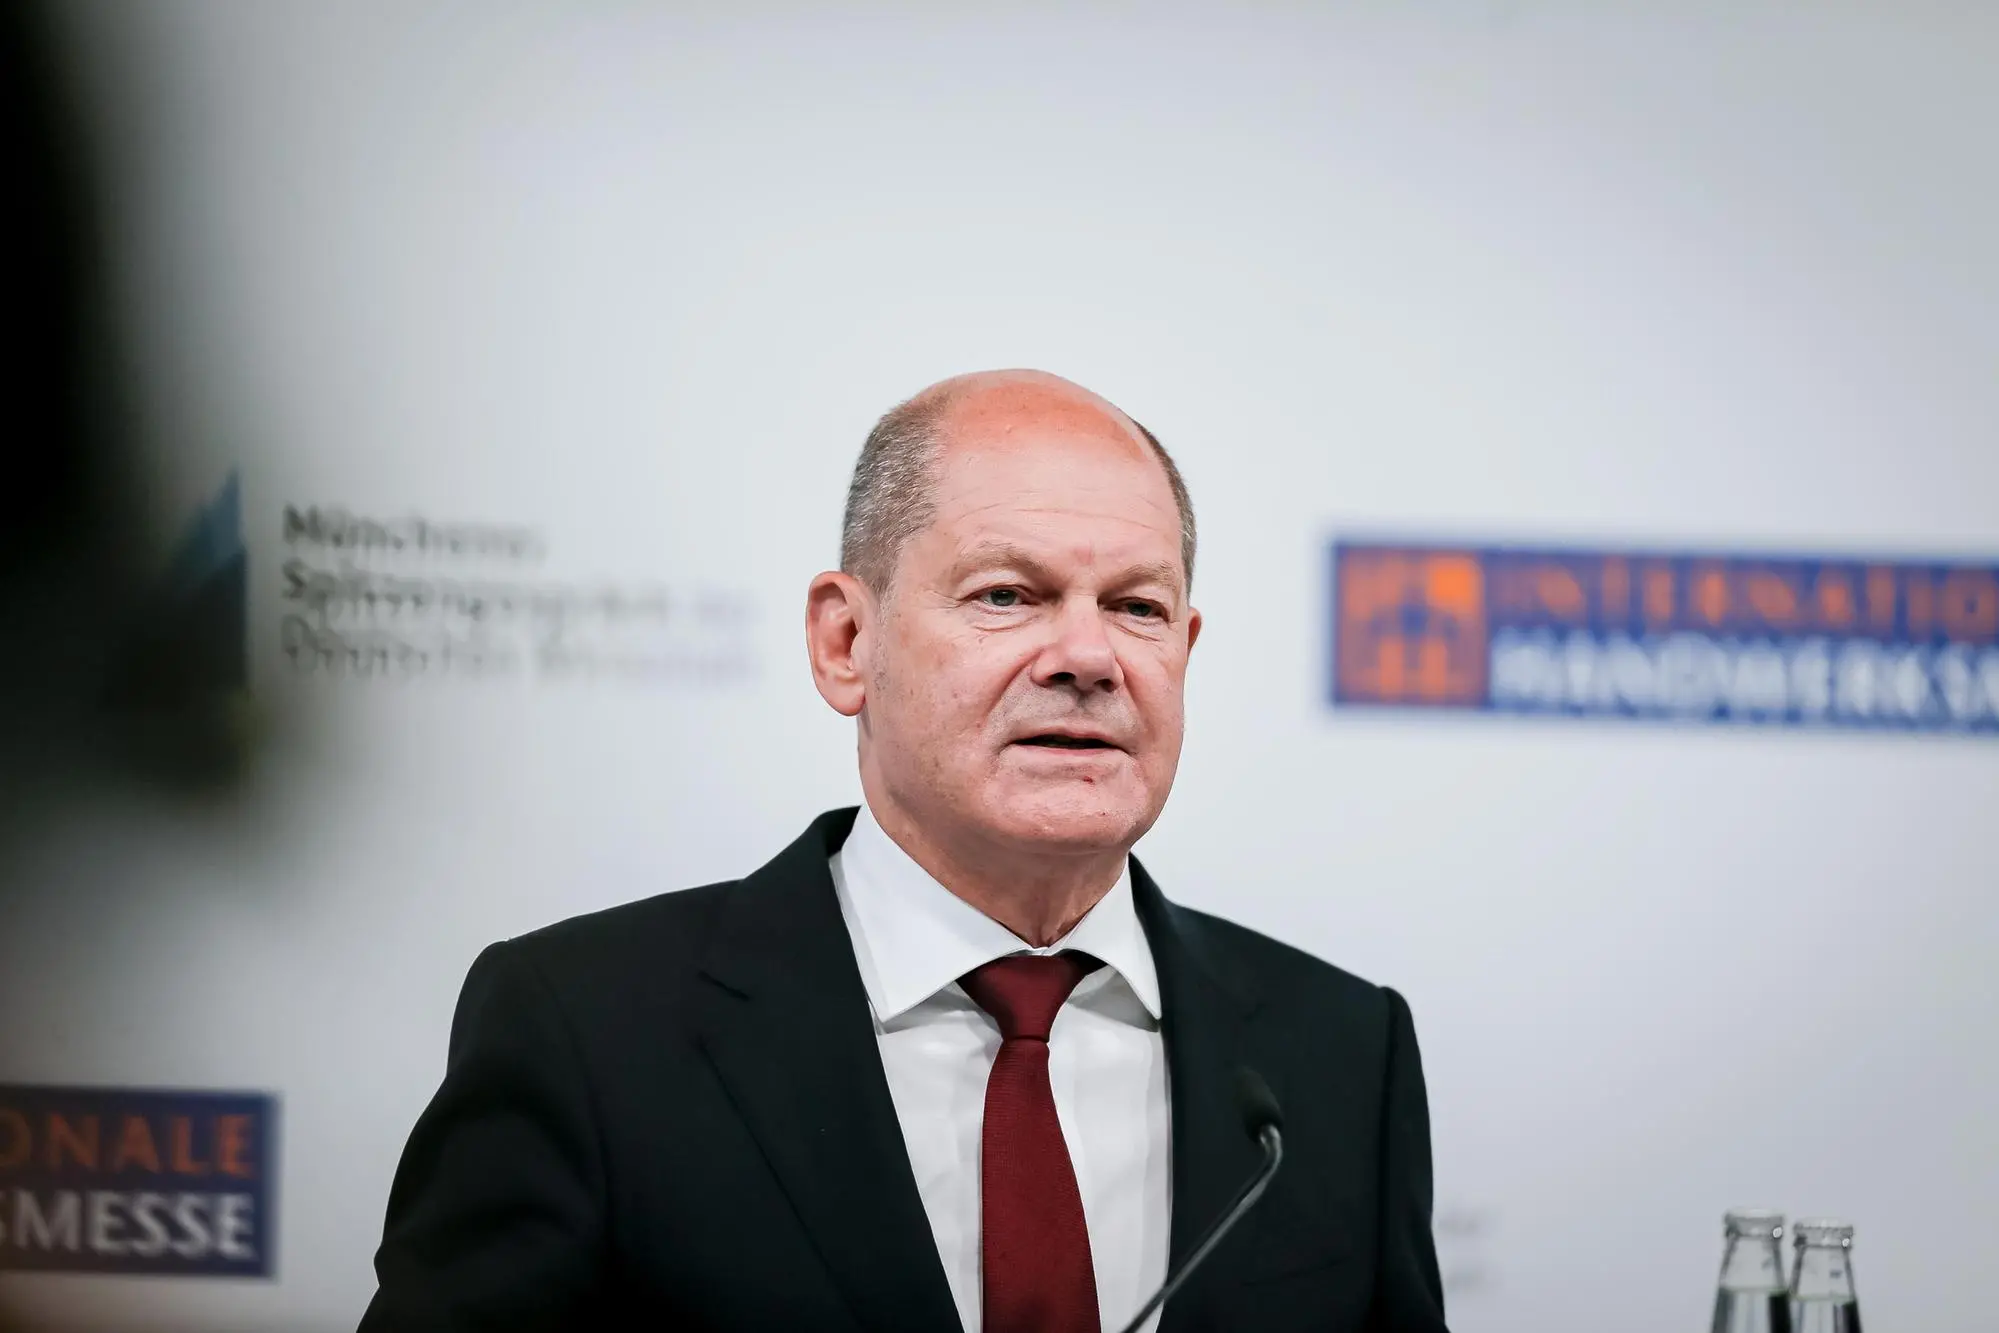 epa10059569 German Chancellor Olaf Scholz speaks during a press conference after the Munich High-Level Economic Talks in Munich, Germany, 08 July 2022. The talks are a high level conference with representatives of the four largest German employer and trade associations that is held annually during the international trade fair in Munich. EPA/LEONHARD SIMON